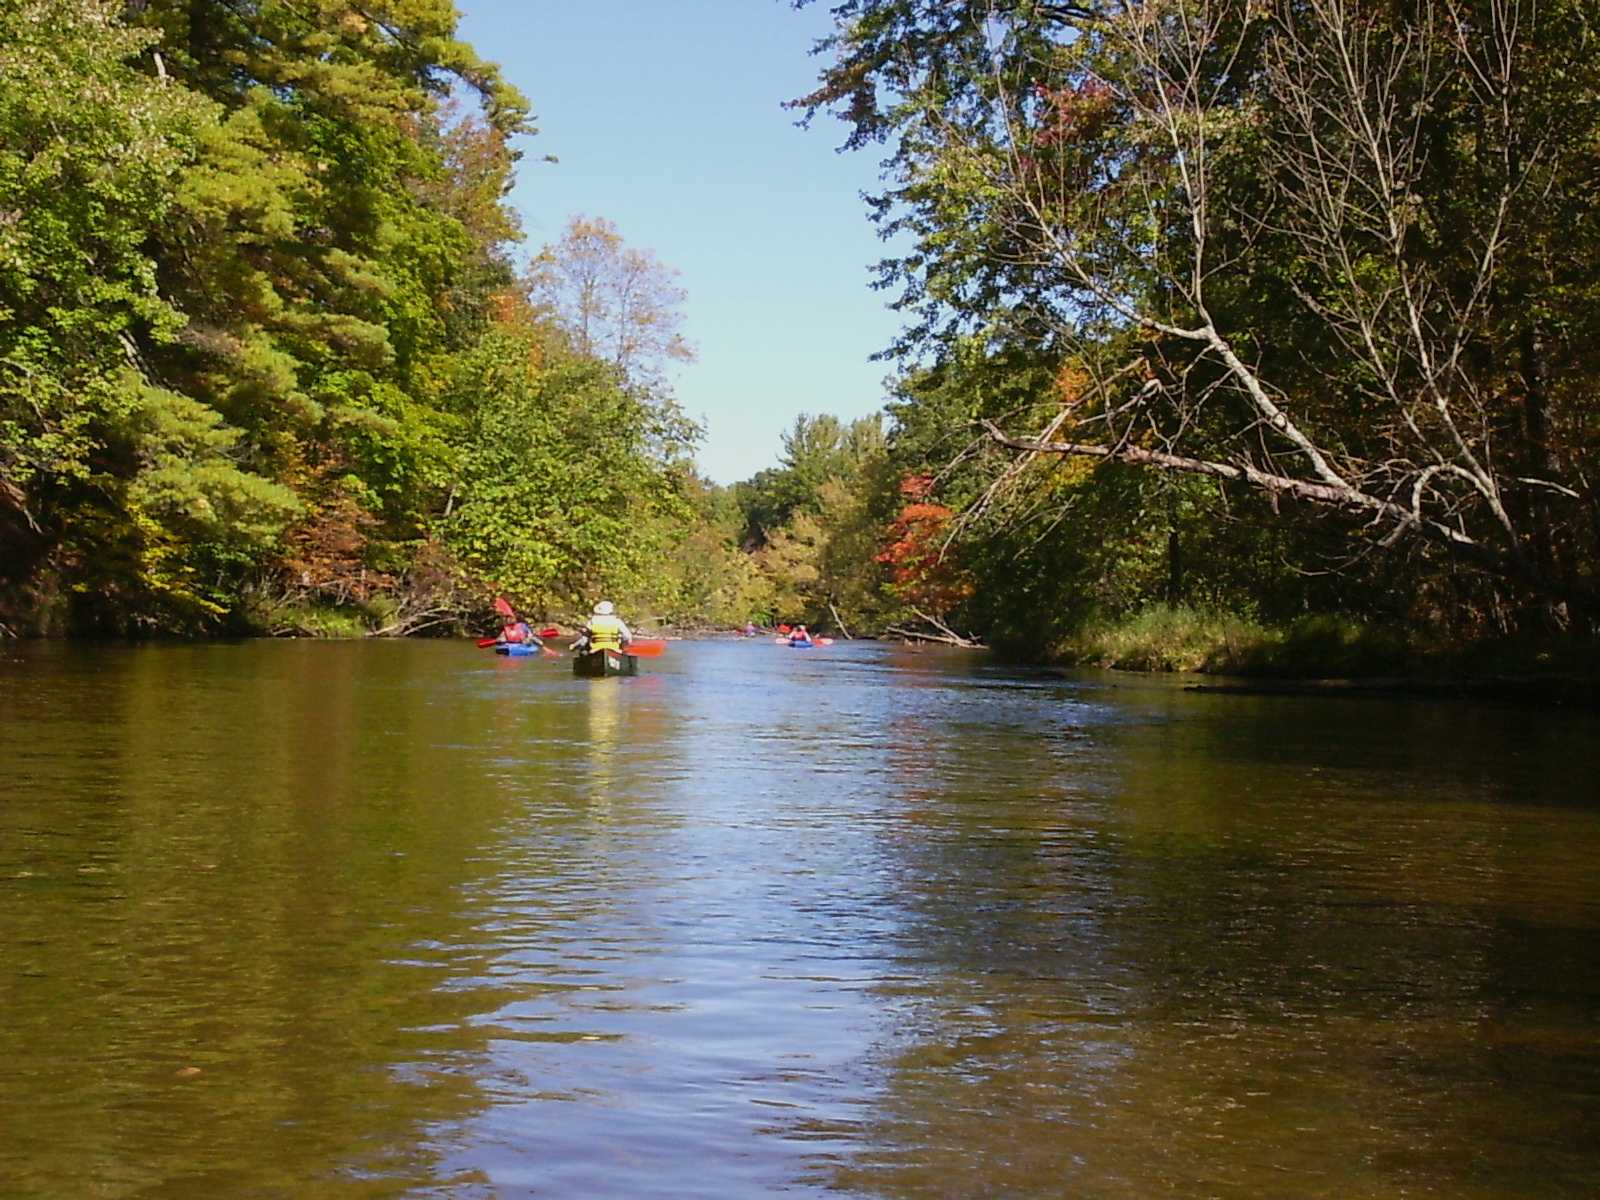 File:Pere Marquette River in Fall Manistee National Forest.JPG